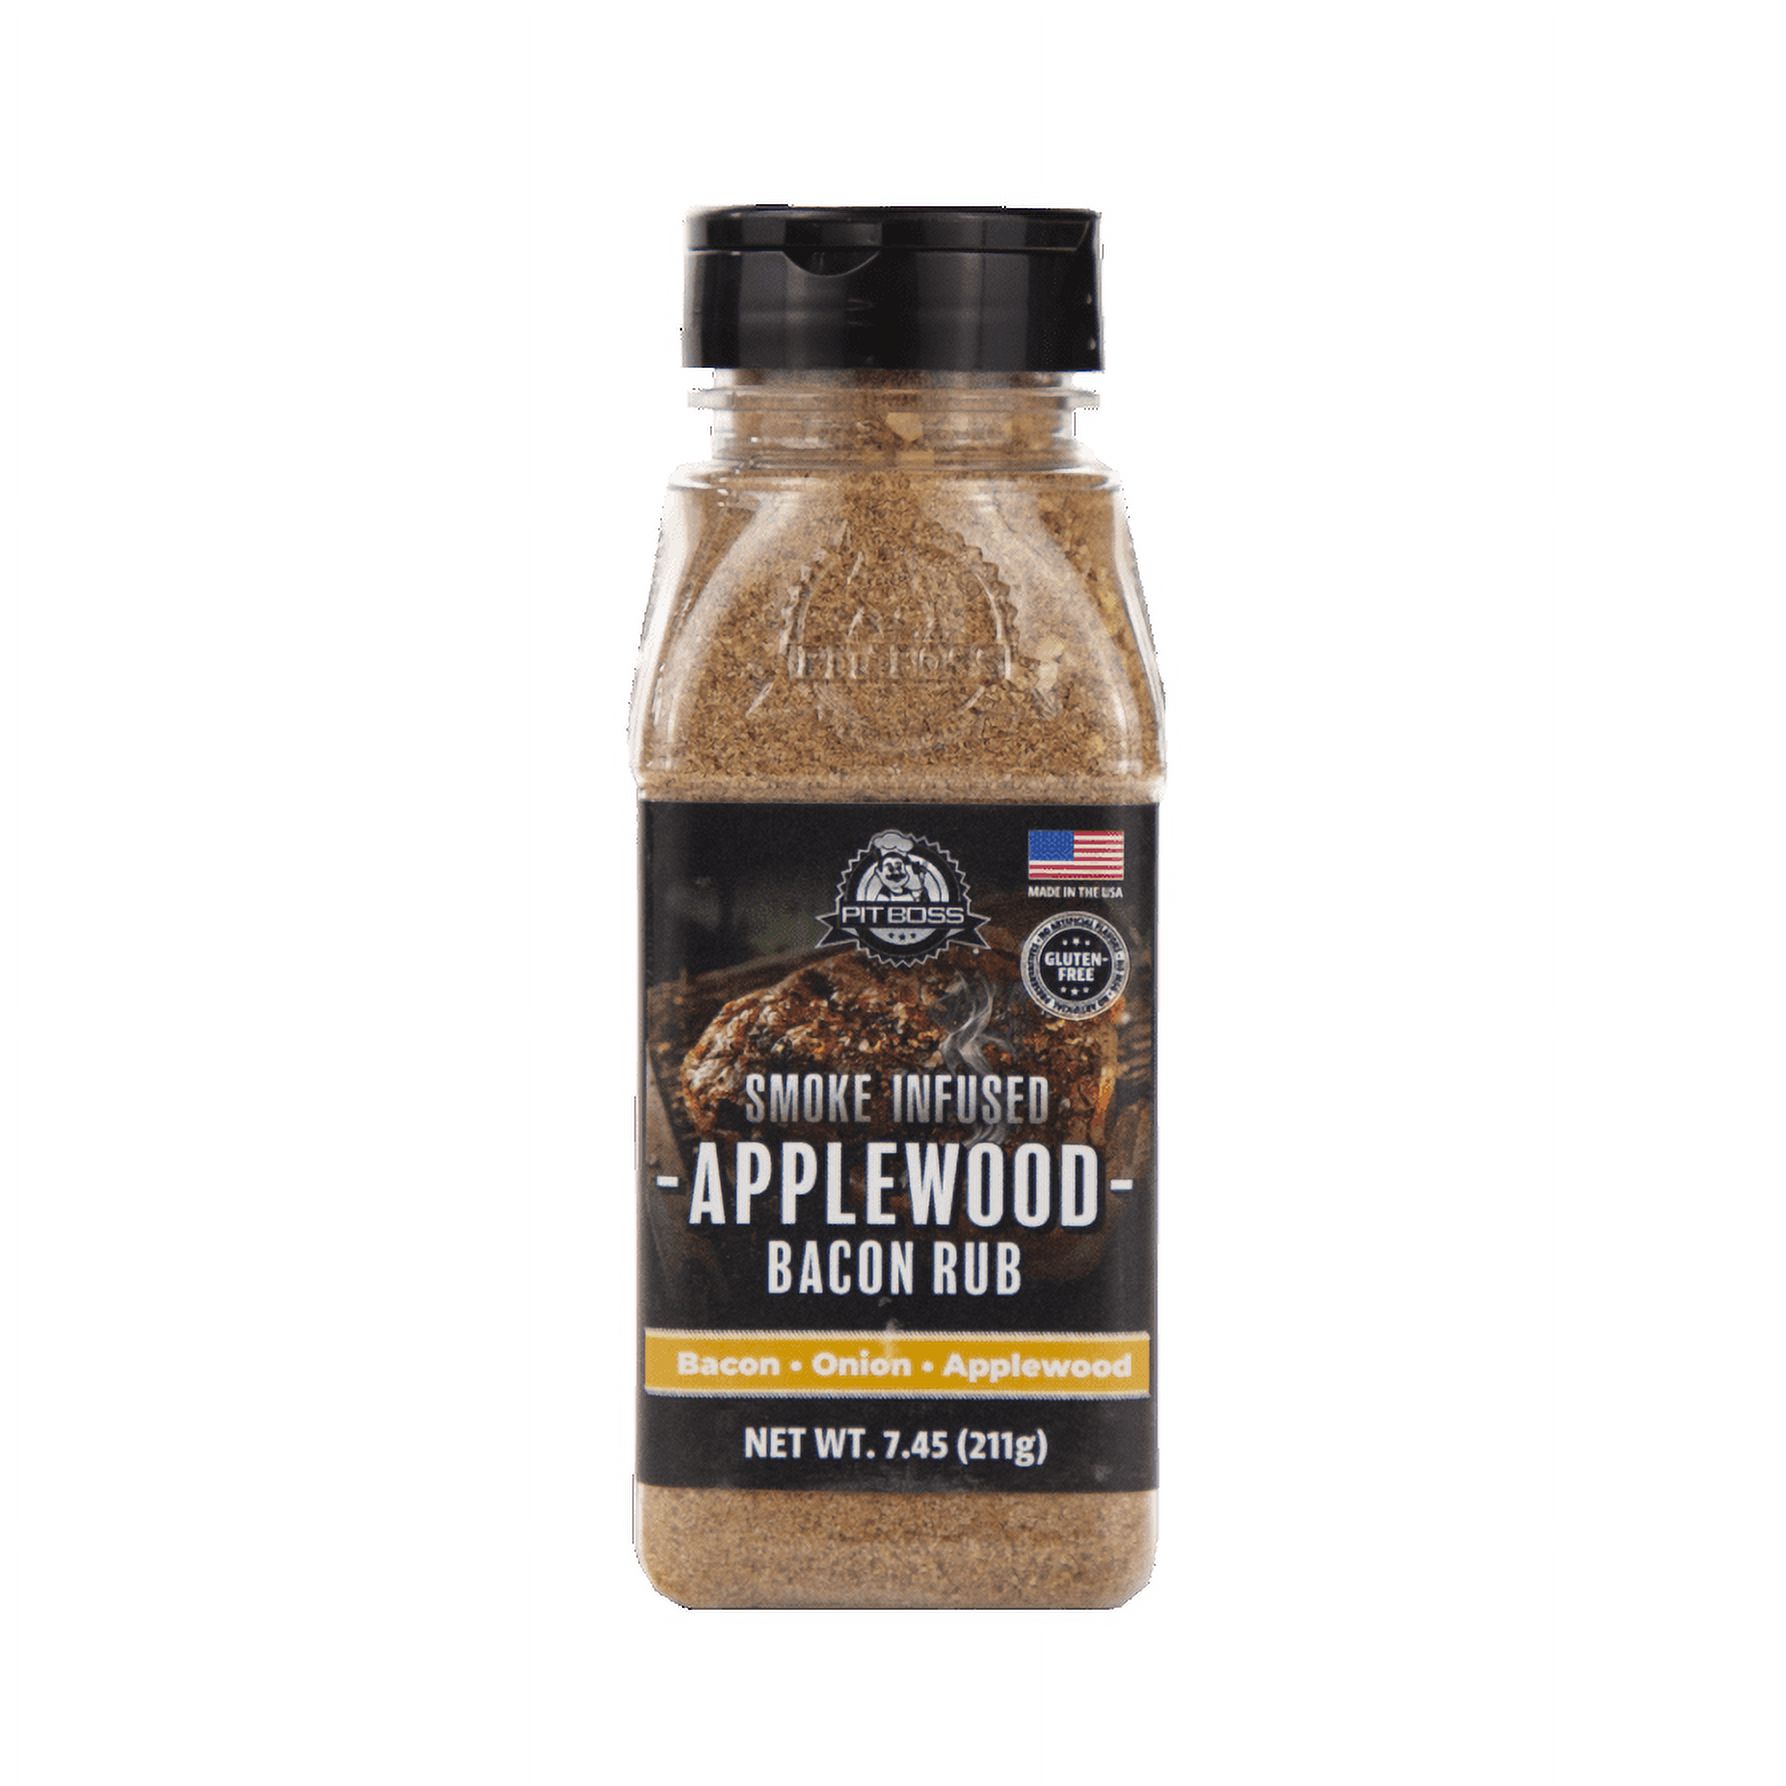 Pit Boss Applewood Bacon Barbecue Rubs and Seasonings - 5 oz - image 1 of 10